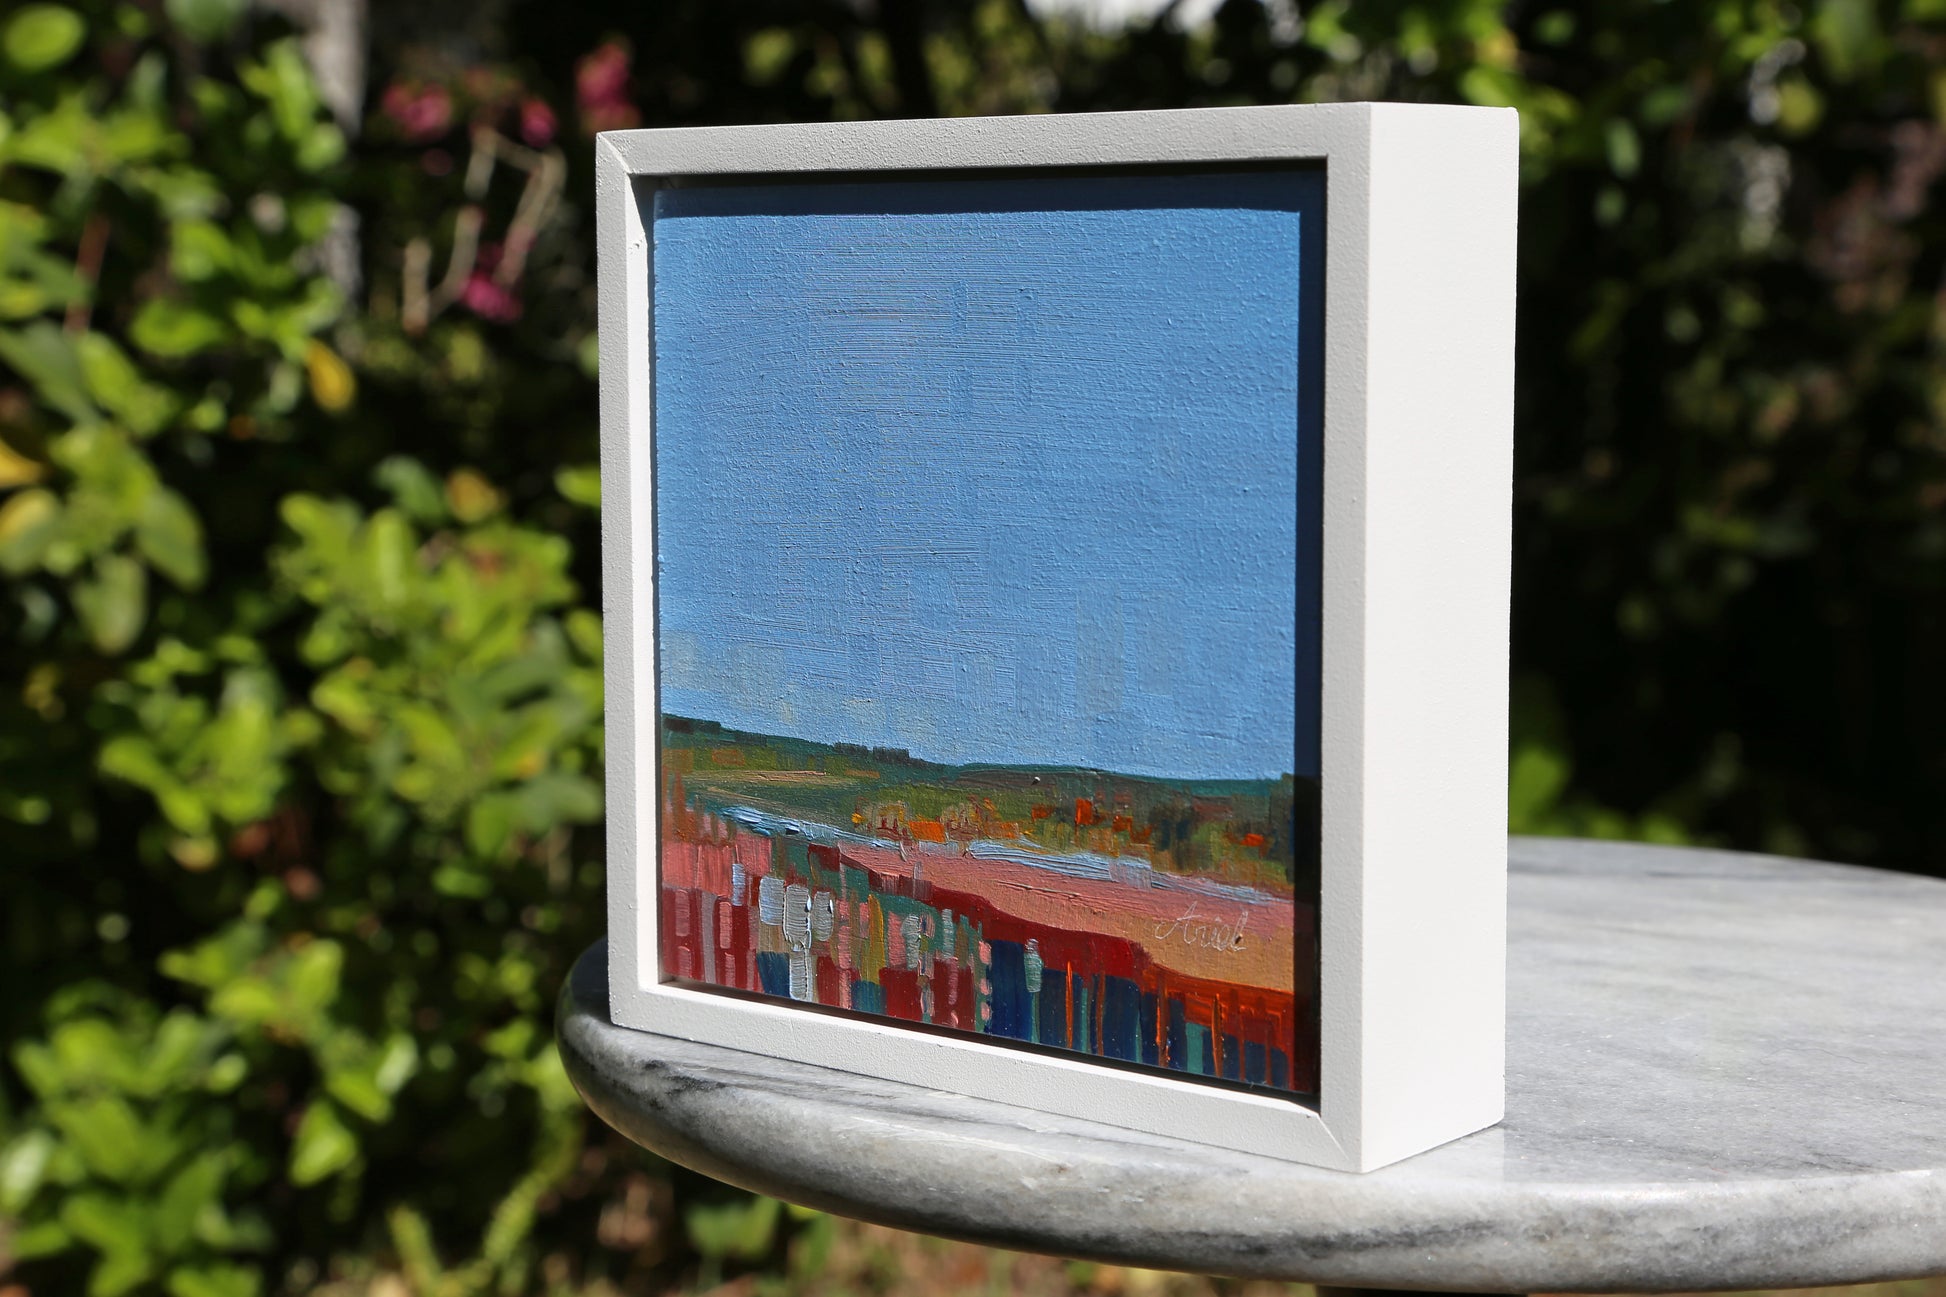 Experience the beauty of nature with Maribel, an original oil painting. Its abstract landscape features vibrant and bold brush strokes in shades of pinks, blues, and greens. A little piece that will add elegance to any space.